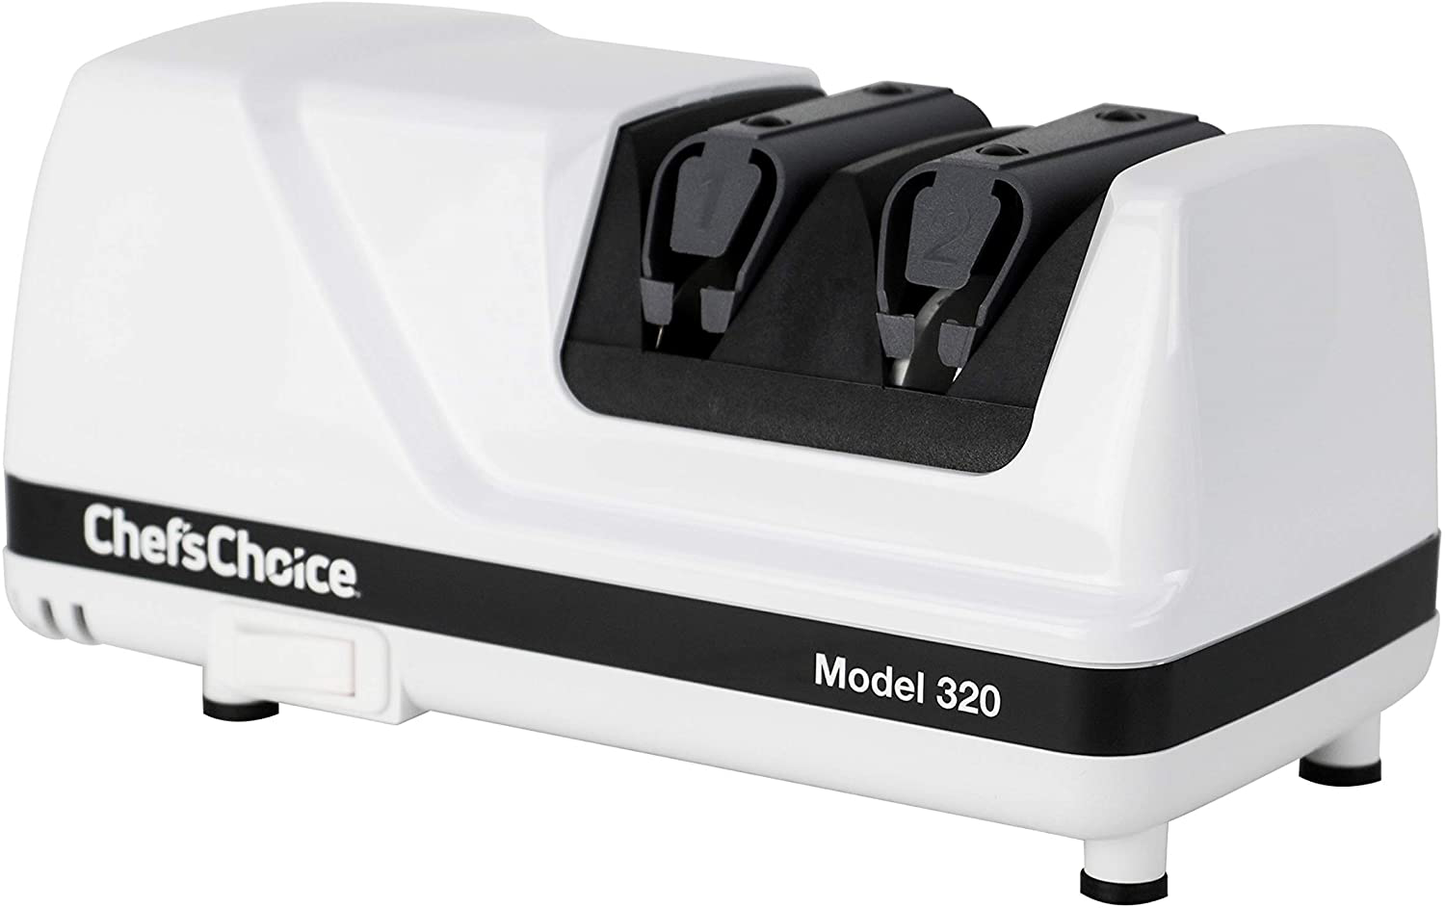 Chef'sChoice 320 Hone Flexhone Strop Professional Compact Electric Knife Sharpener with Diamond Abrasives & Precision Angle Control, 2-Stage, White